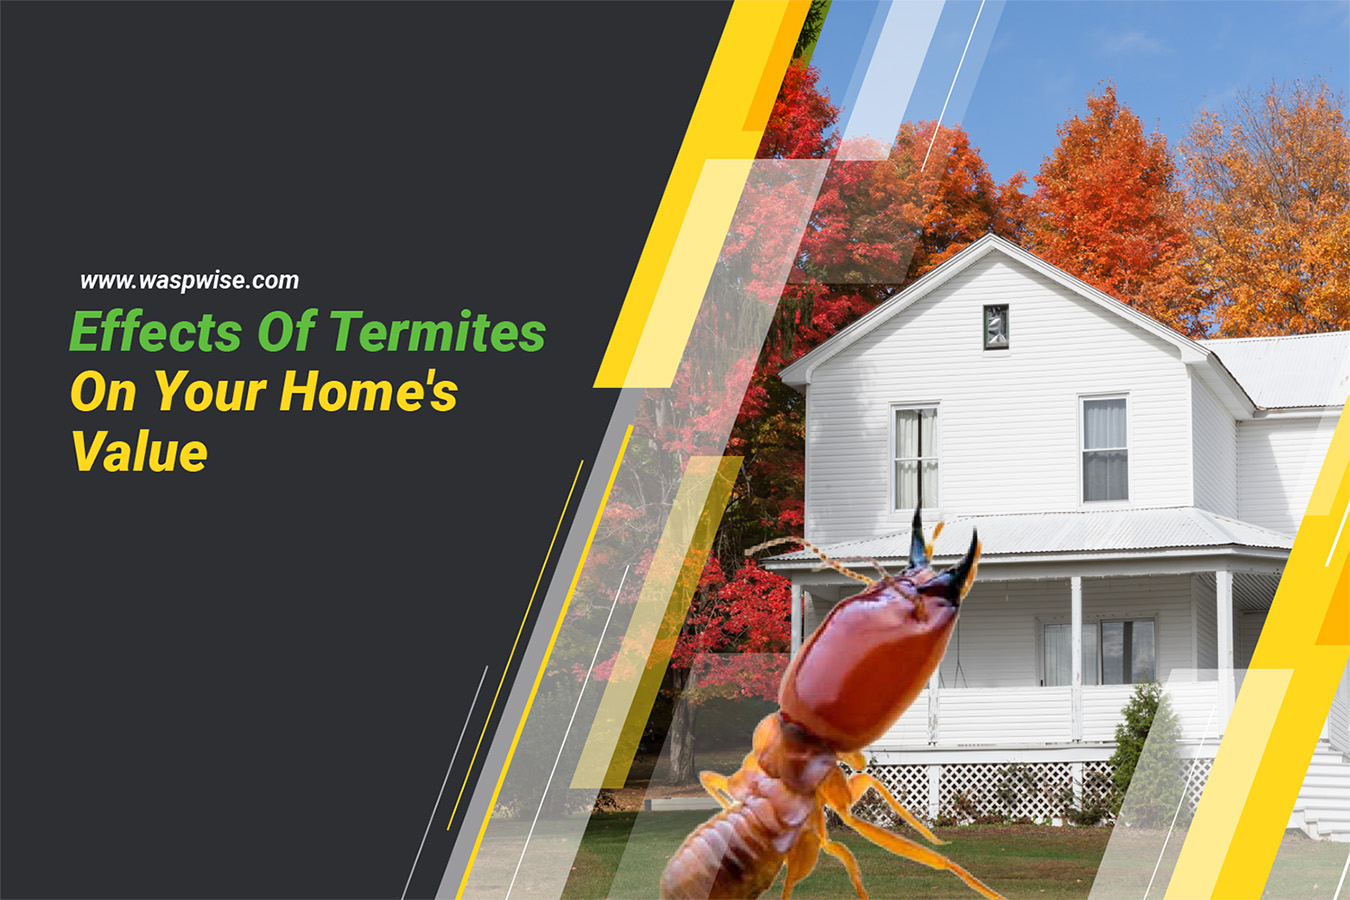 Effects Of Termites On Your Home's Value